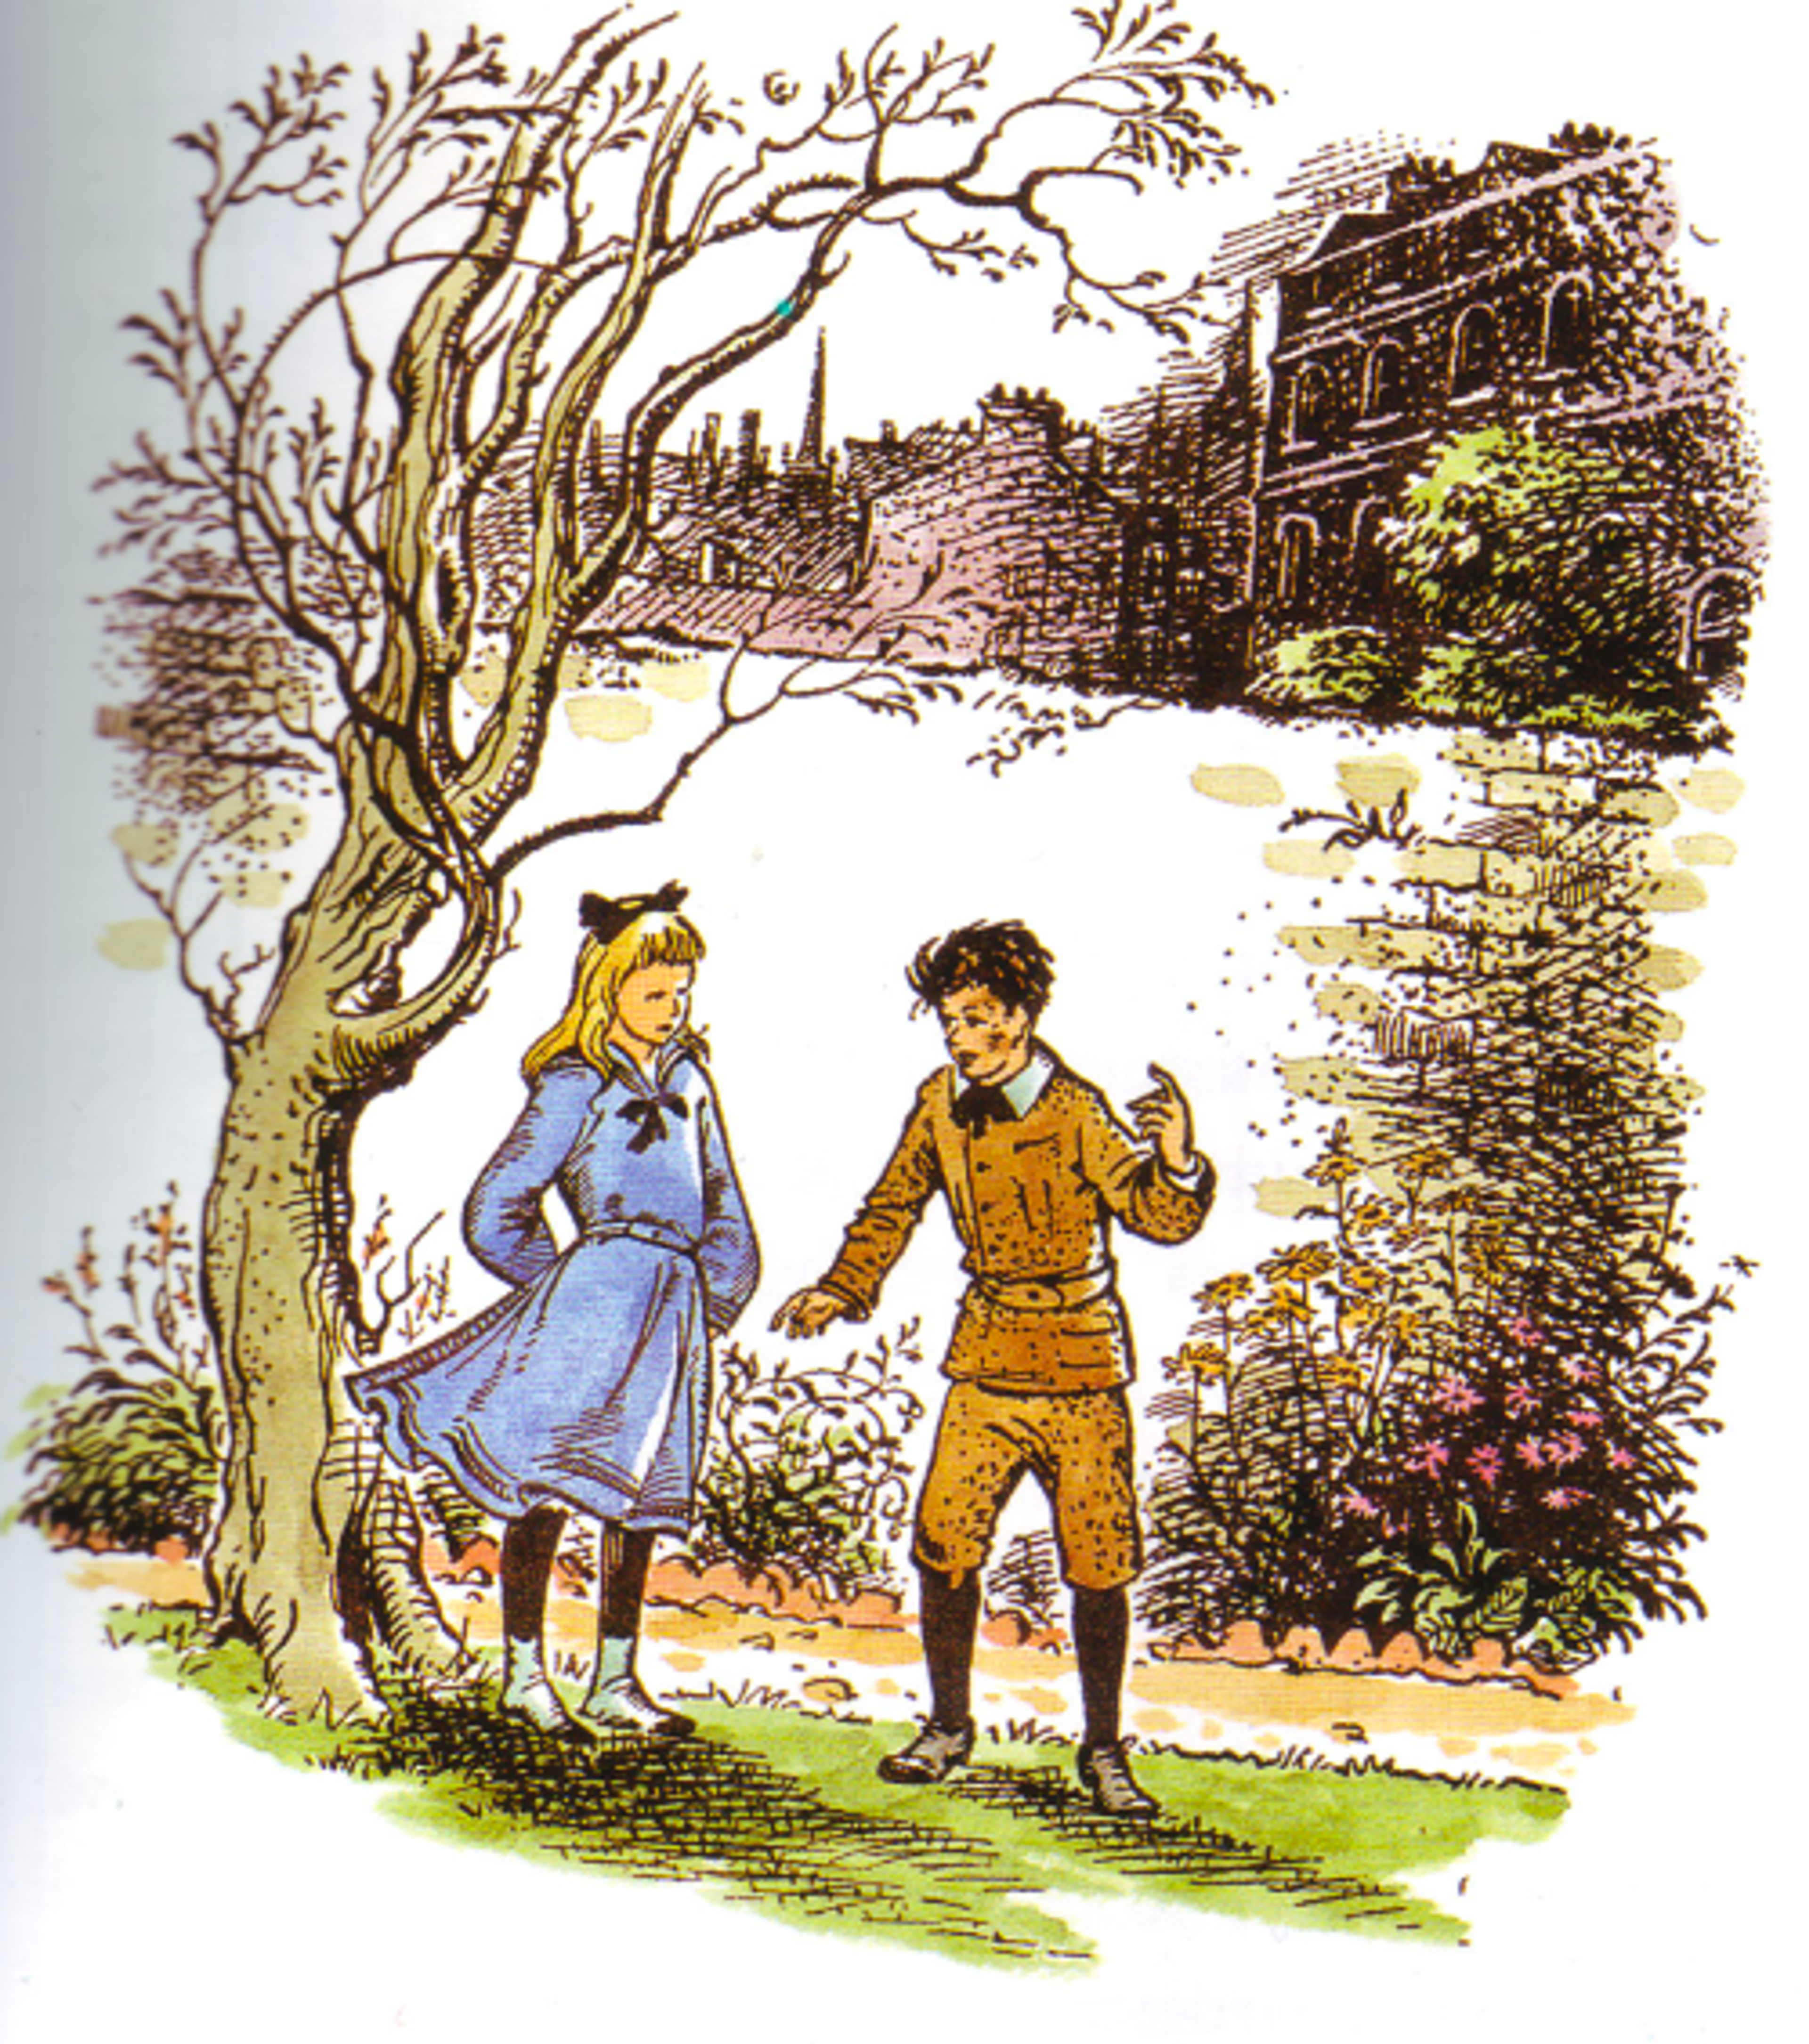 Polly and Digory under a tree